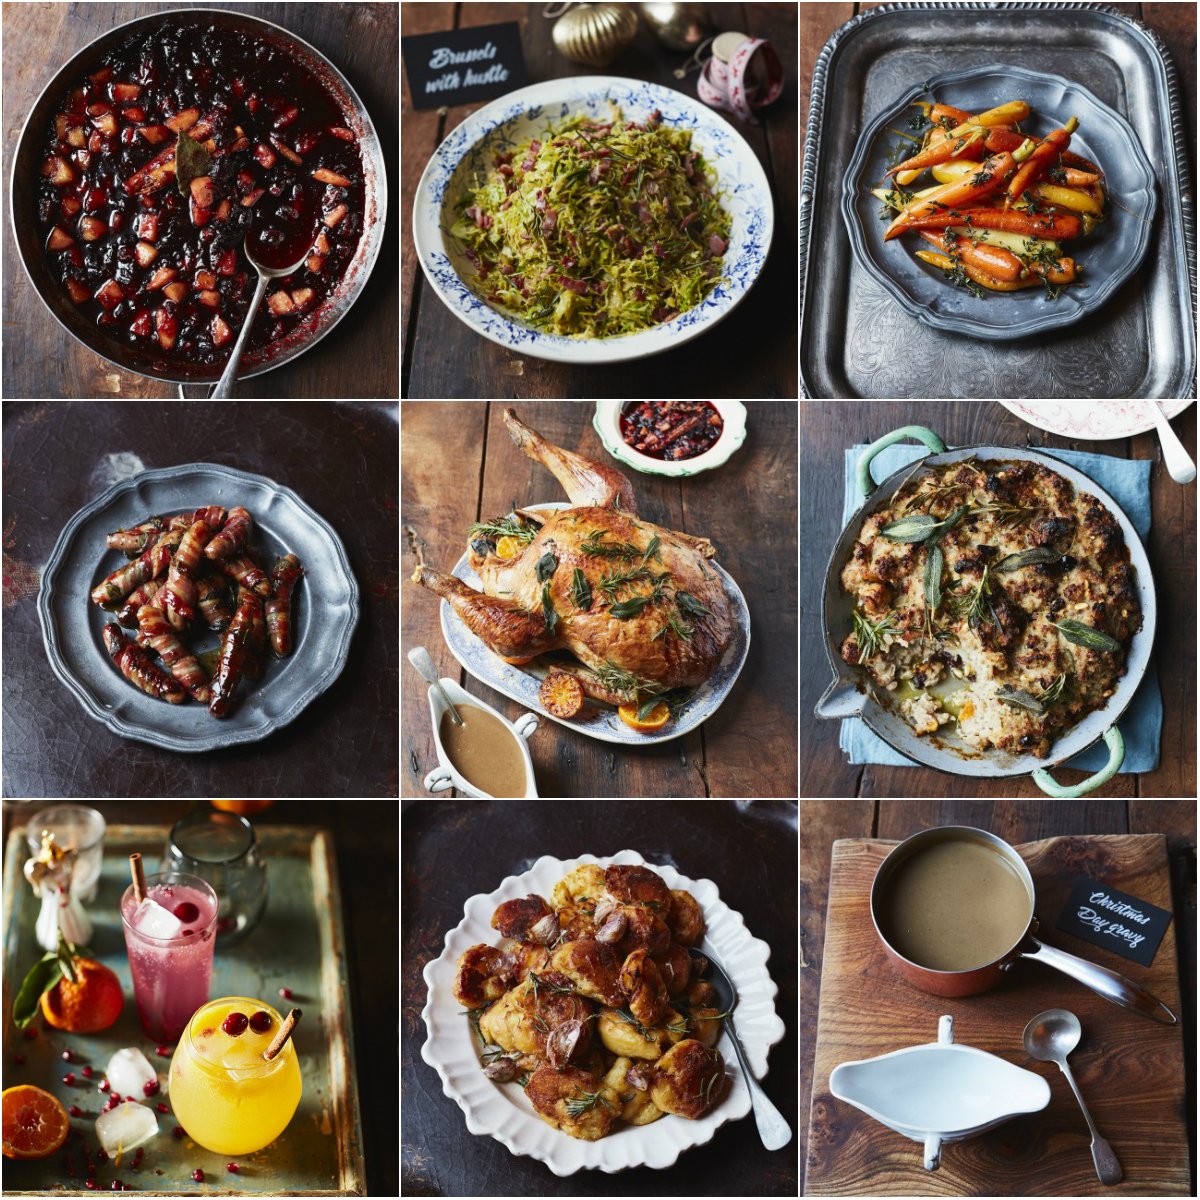 On now everyone my #Christmas special. @Channel4 #JamiesChristmas https://t.co/5DRCiiVUYw